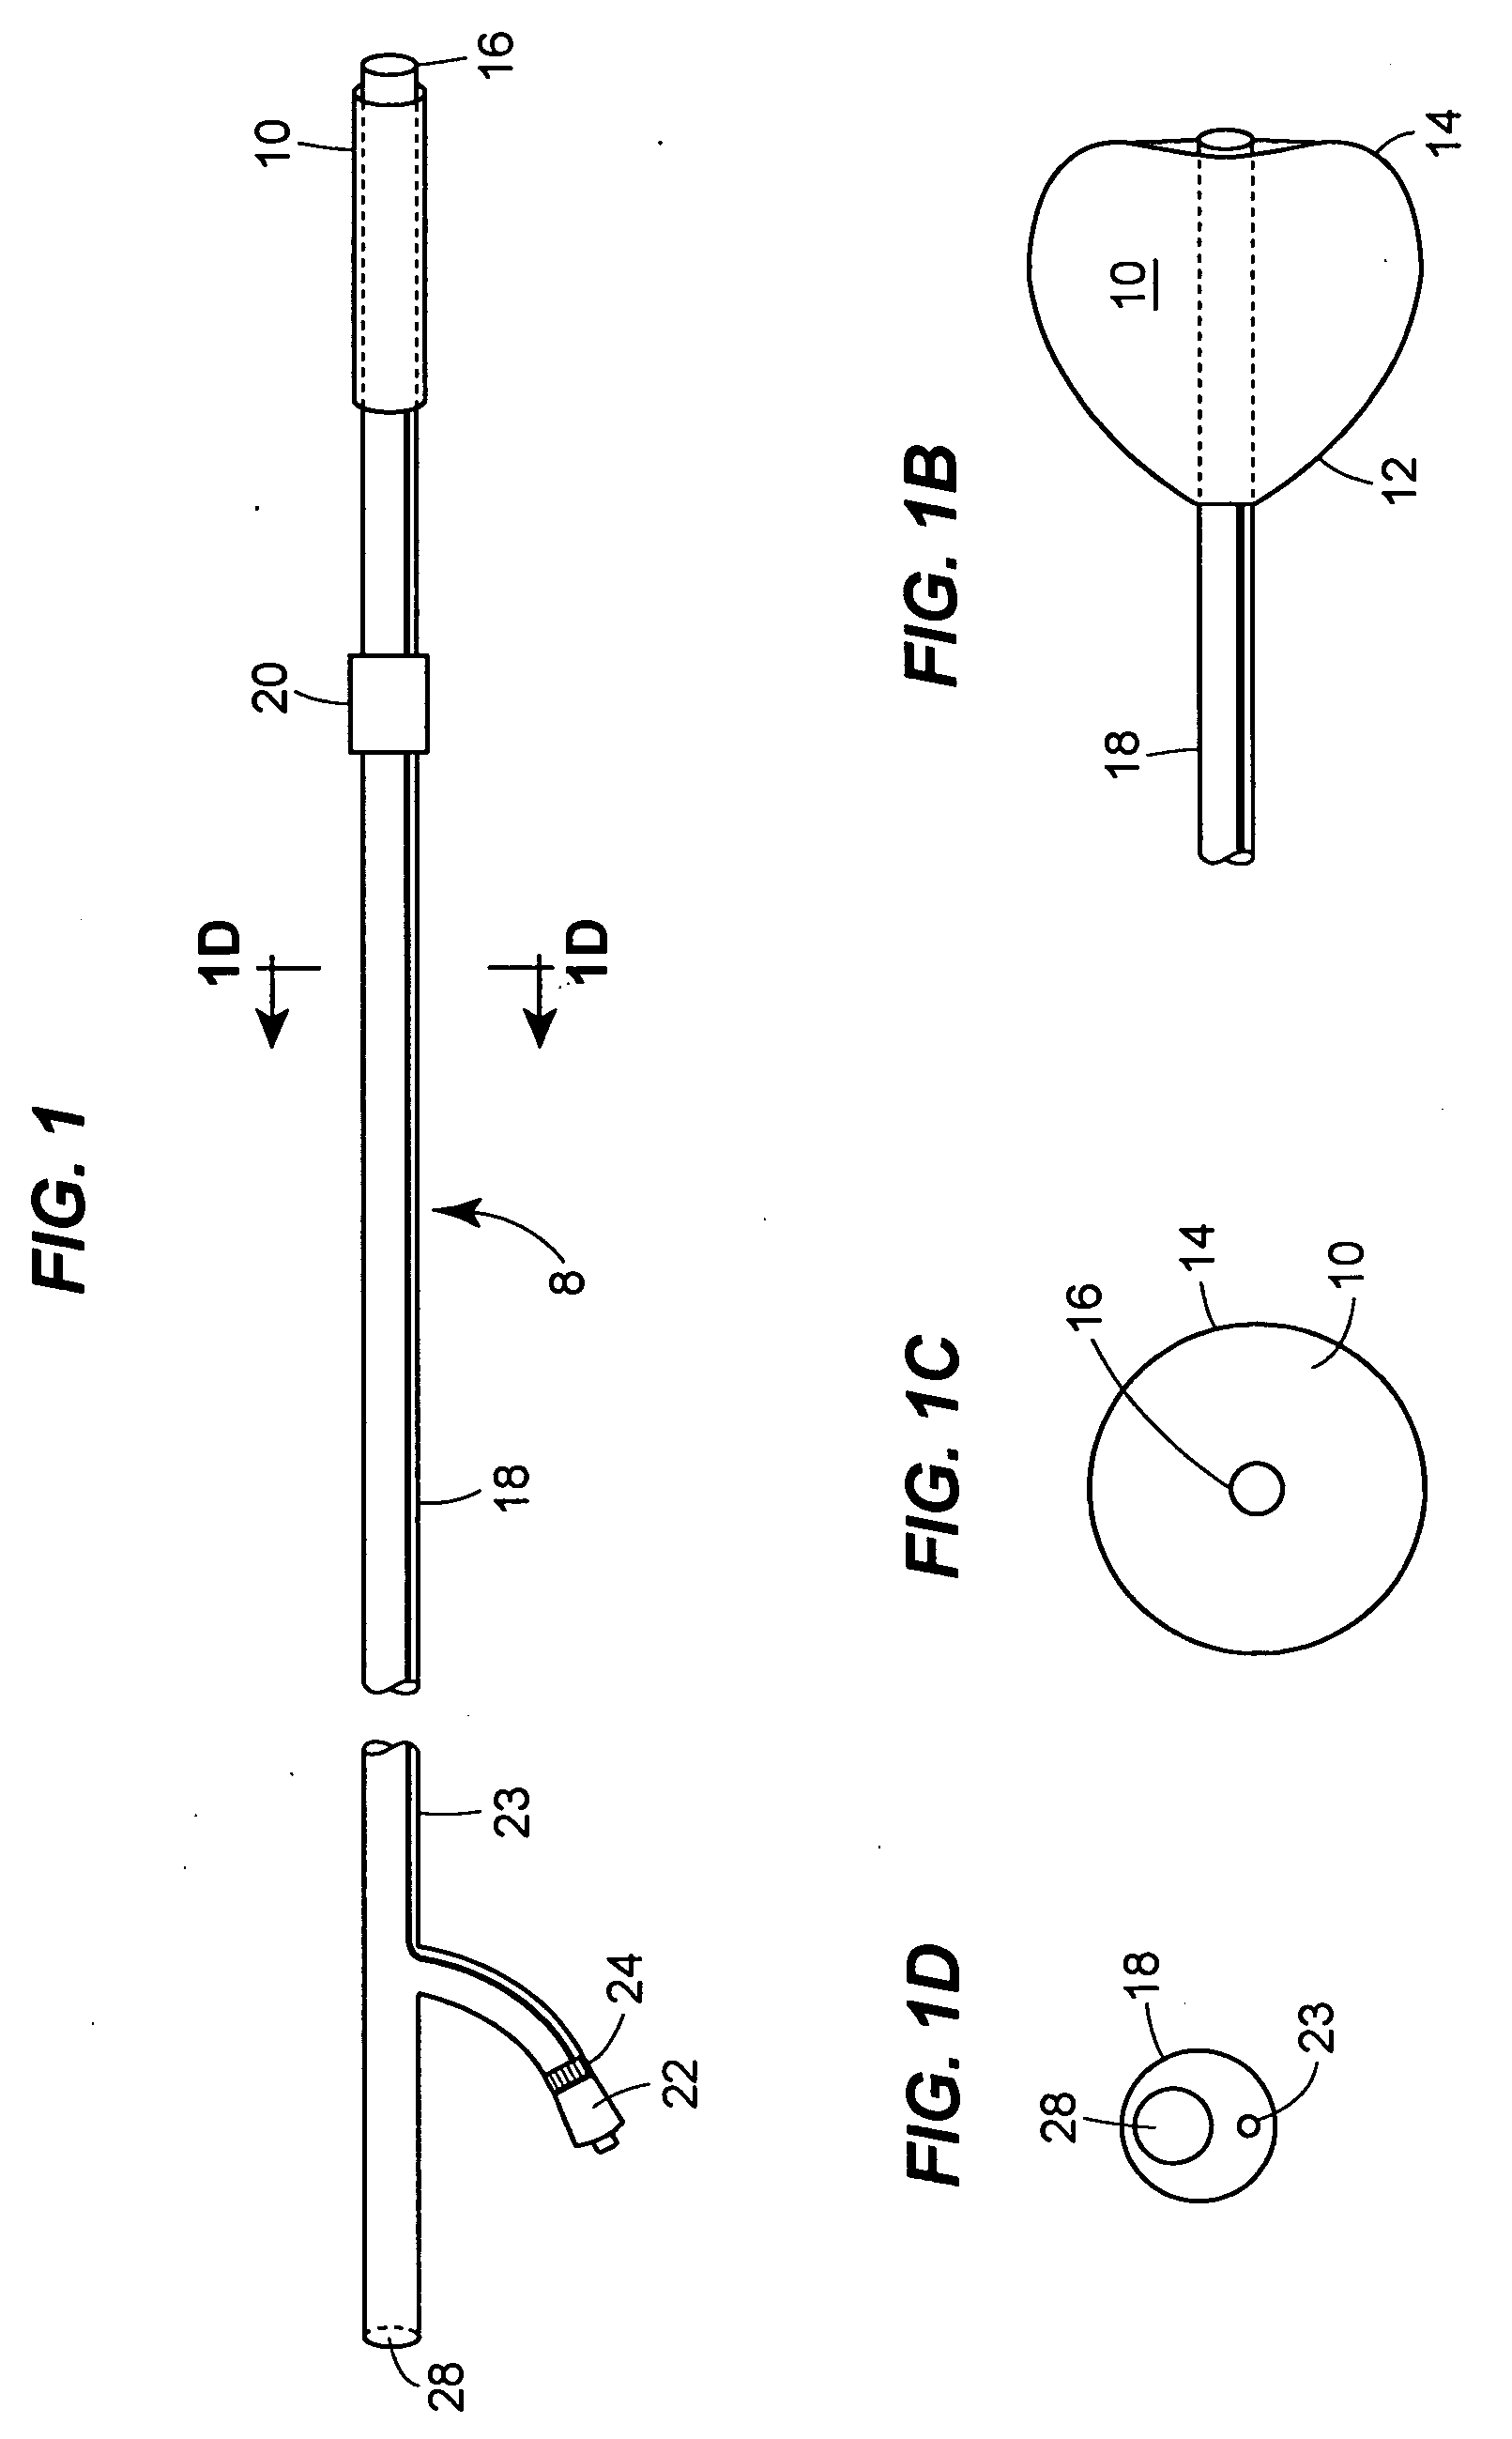 Single balloon ripening device with novel inserter and inflator